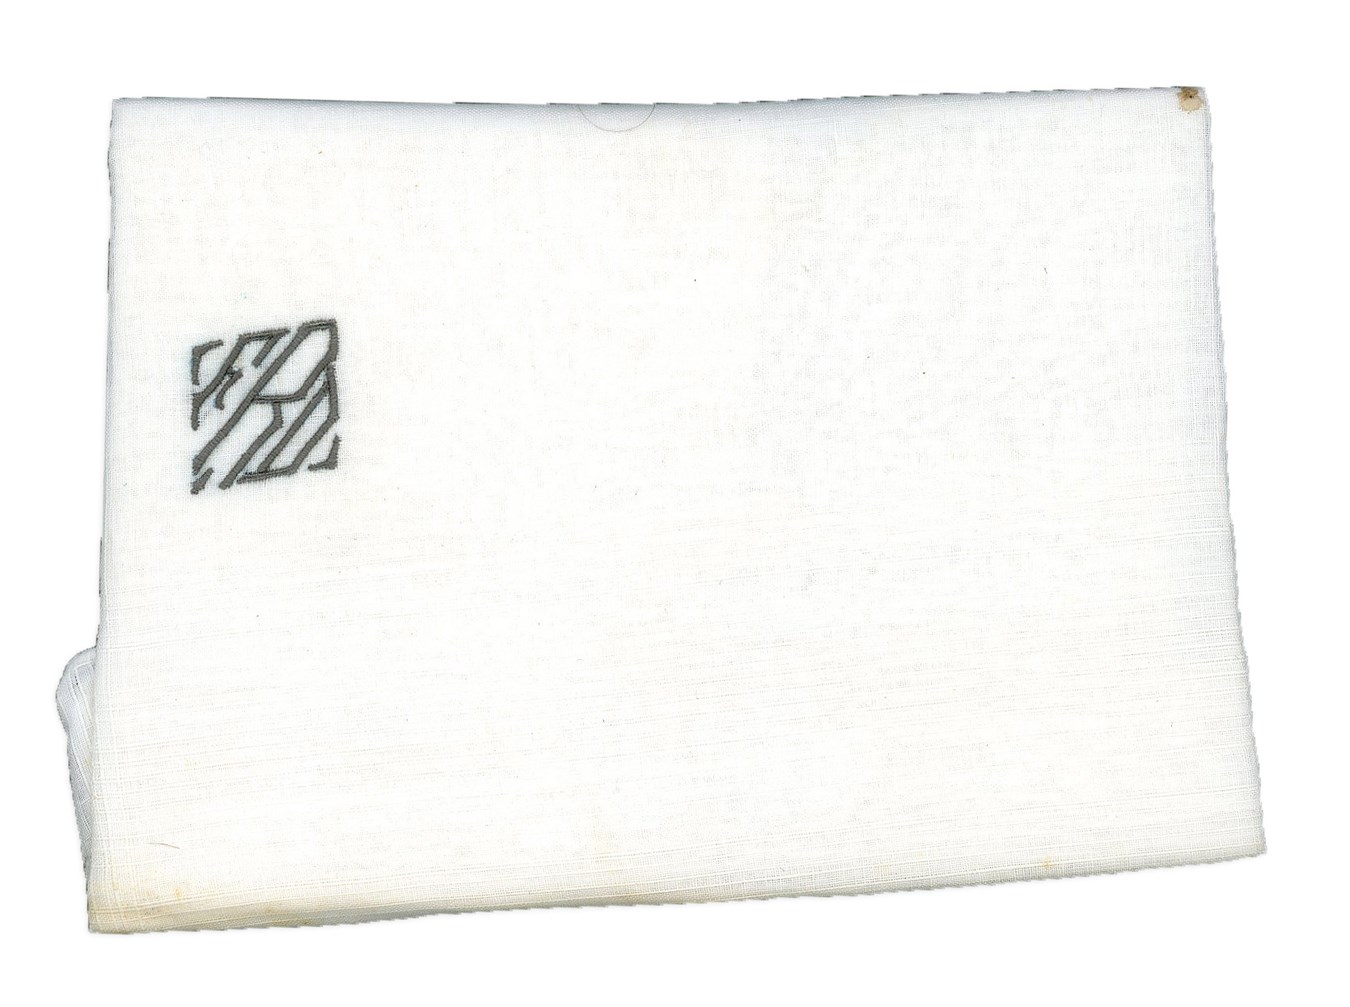 - Franklin Delano Roosevelt Handkerchief Gifted from Son with Signed Letter